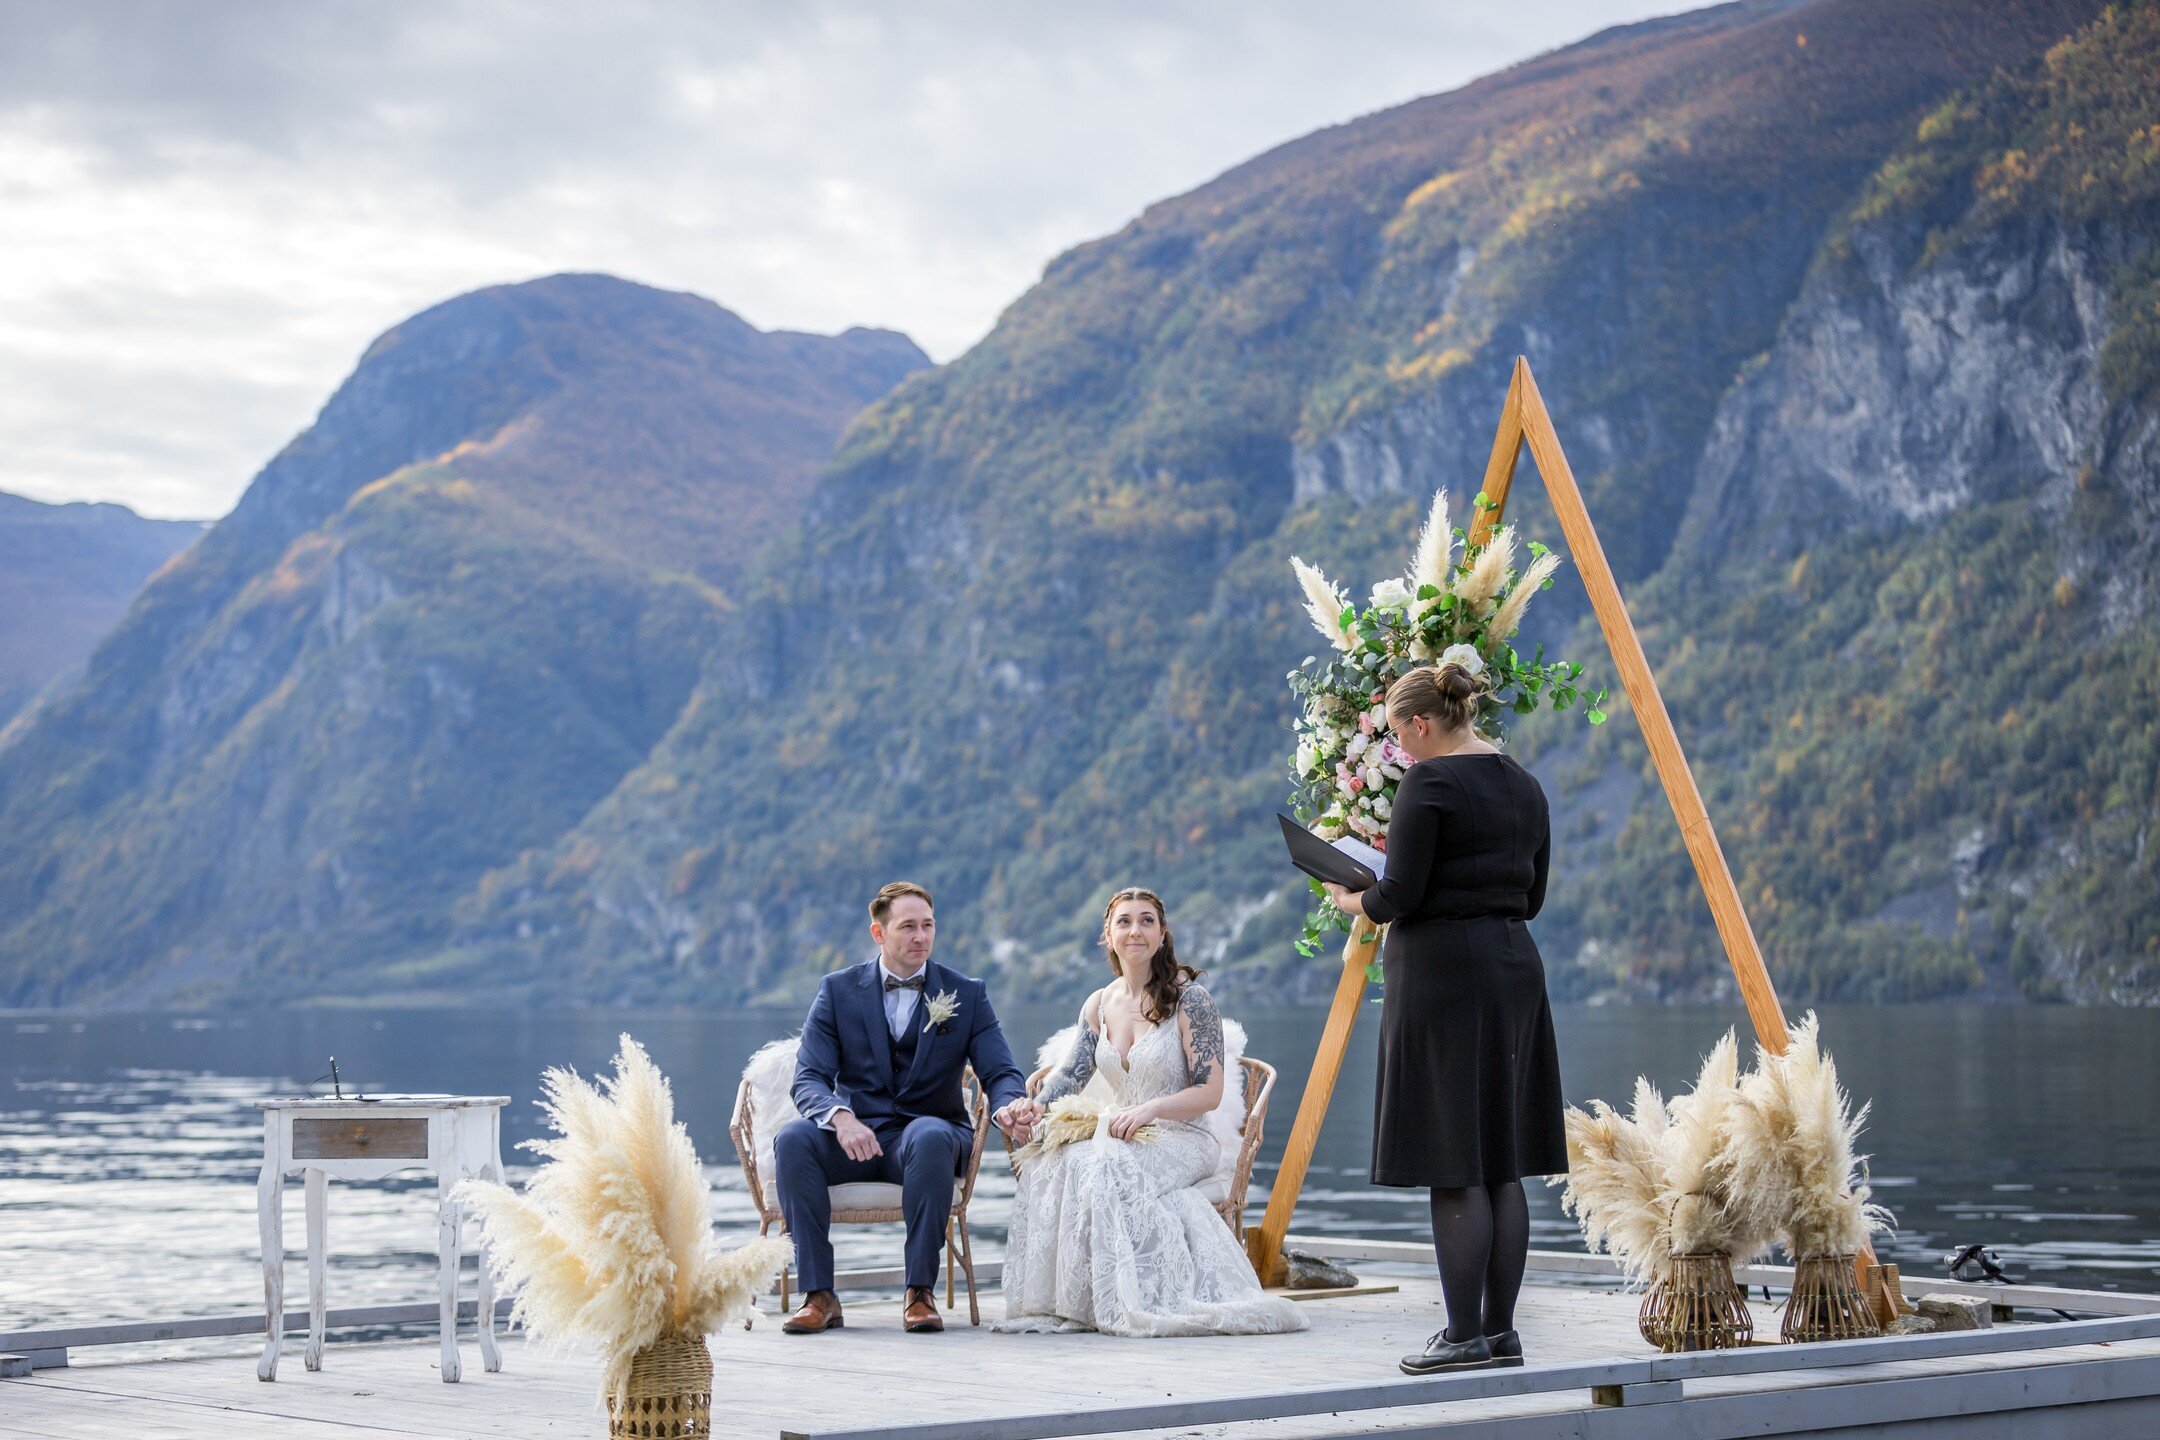 Our wonderful boho decor at one of our private fjord venues. 
@get_married_in_norway 

#fjordwedding #fjordelopement #norwaywedding #weddingnorway #elopenorway #norwayelopement #getmarriedinnorway #elopement